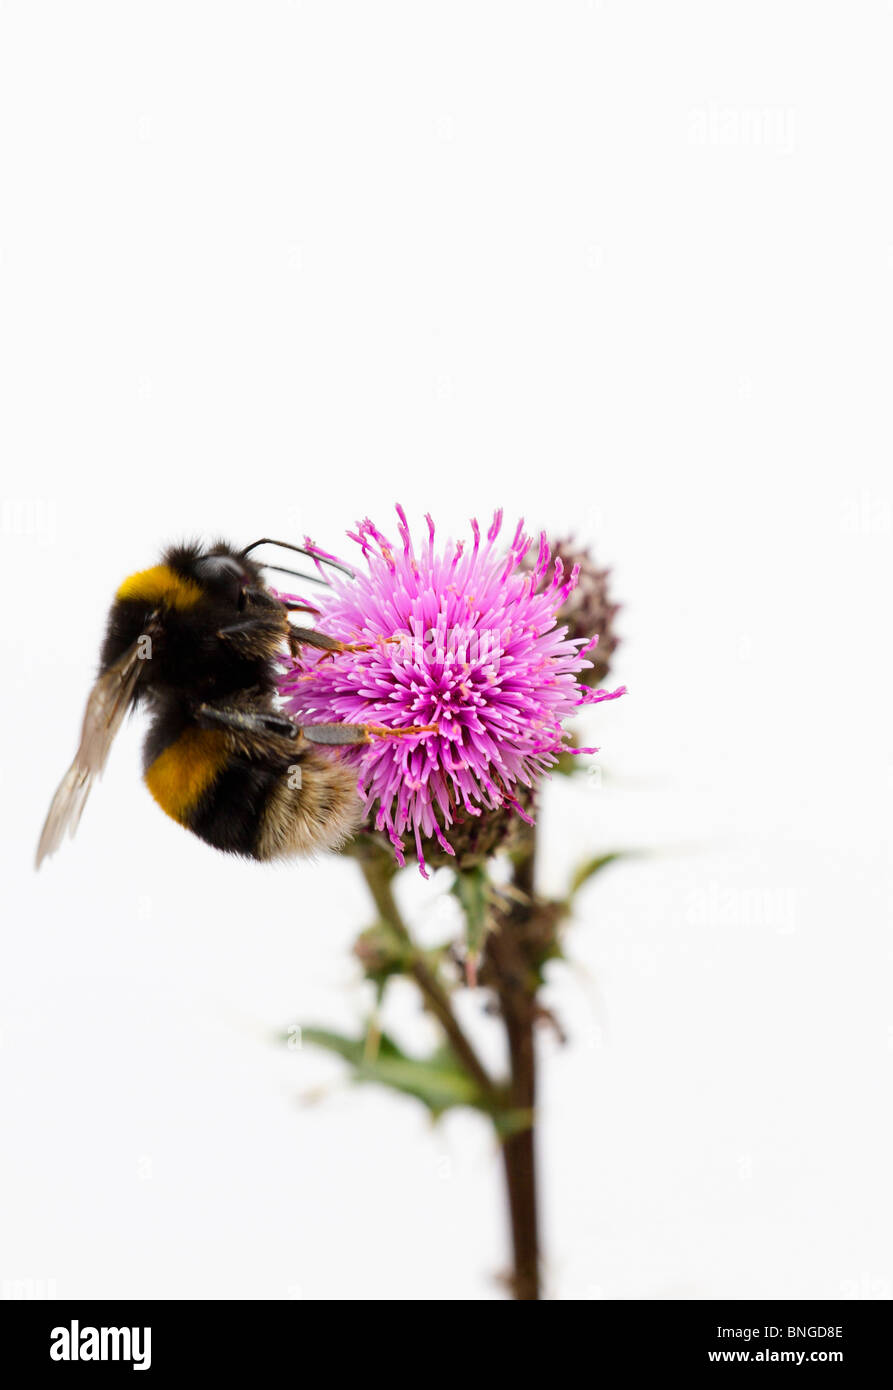 Bumble Bee (Bombus) gathering pollen from a Spear Thistle flower (Cirsium vulgare) Stock Photo